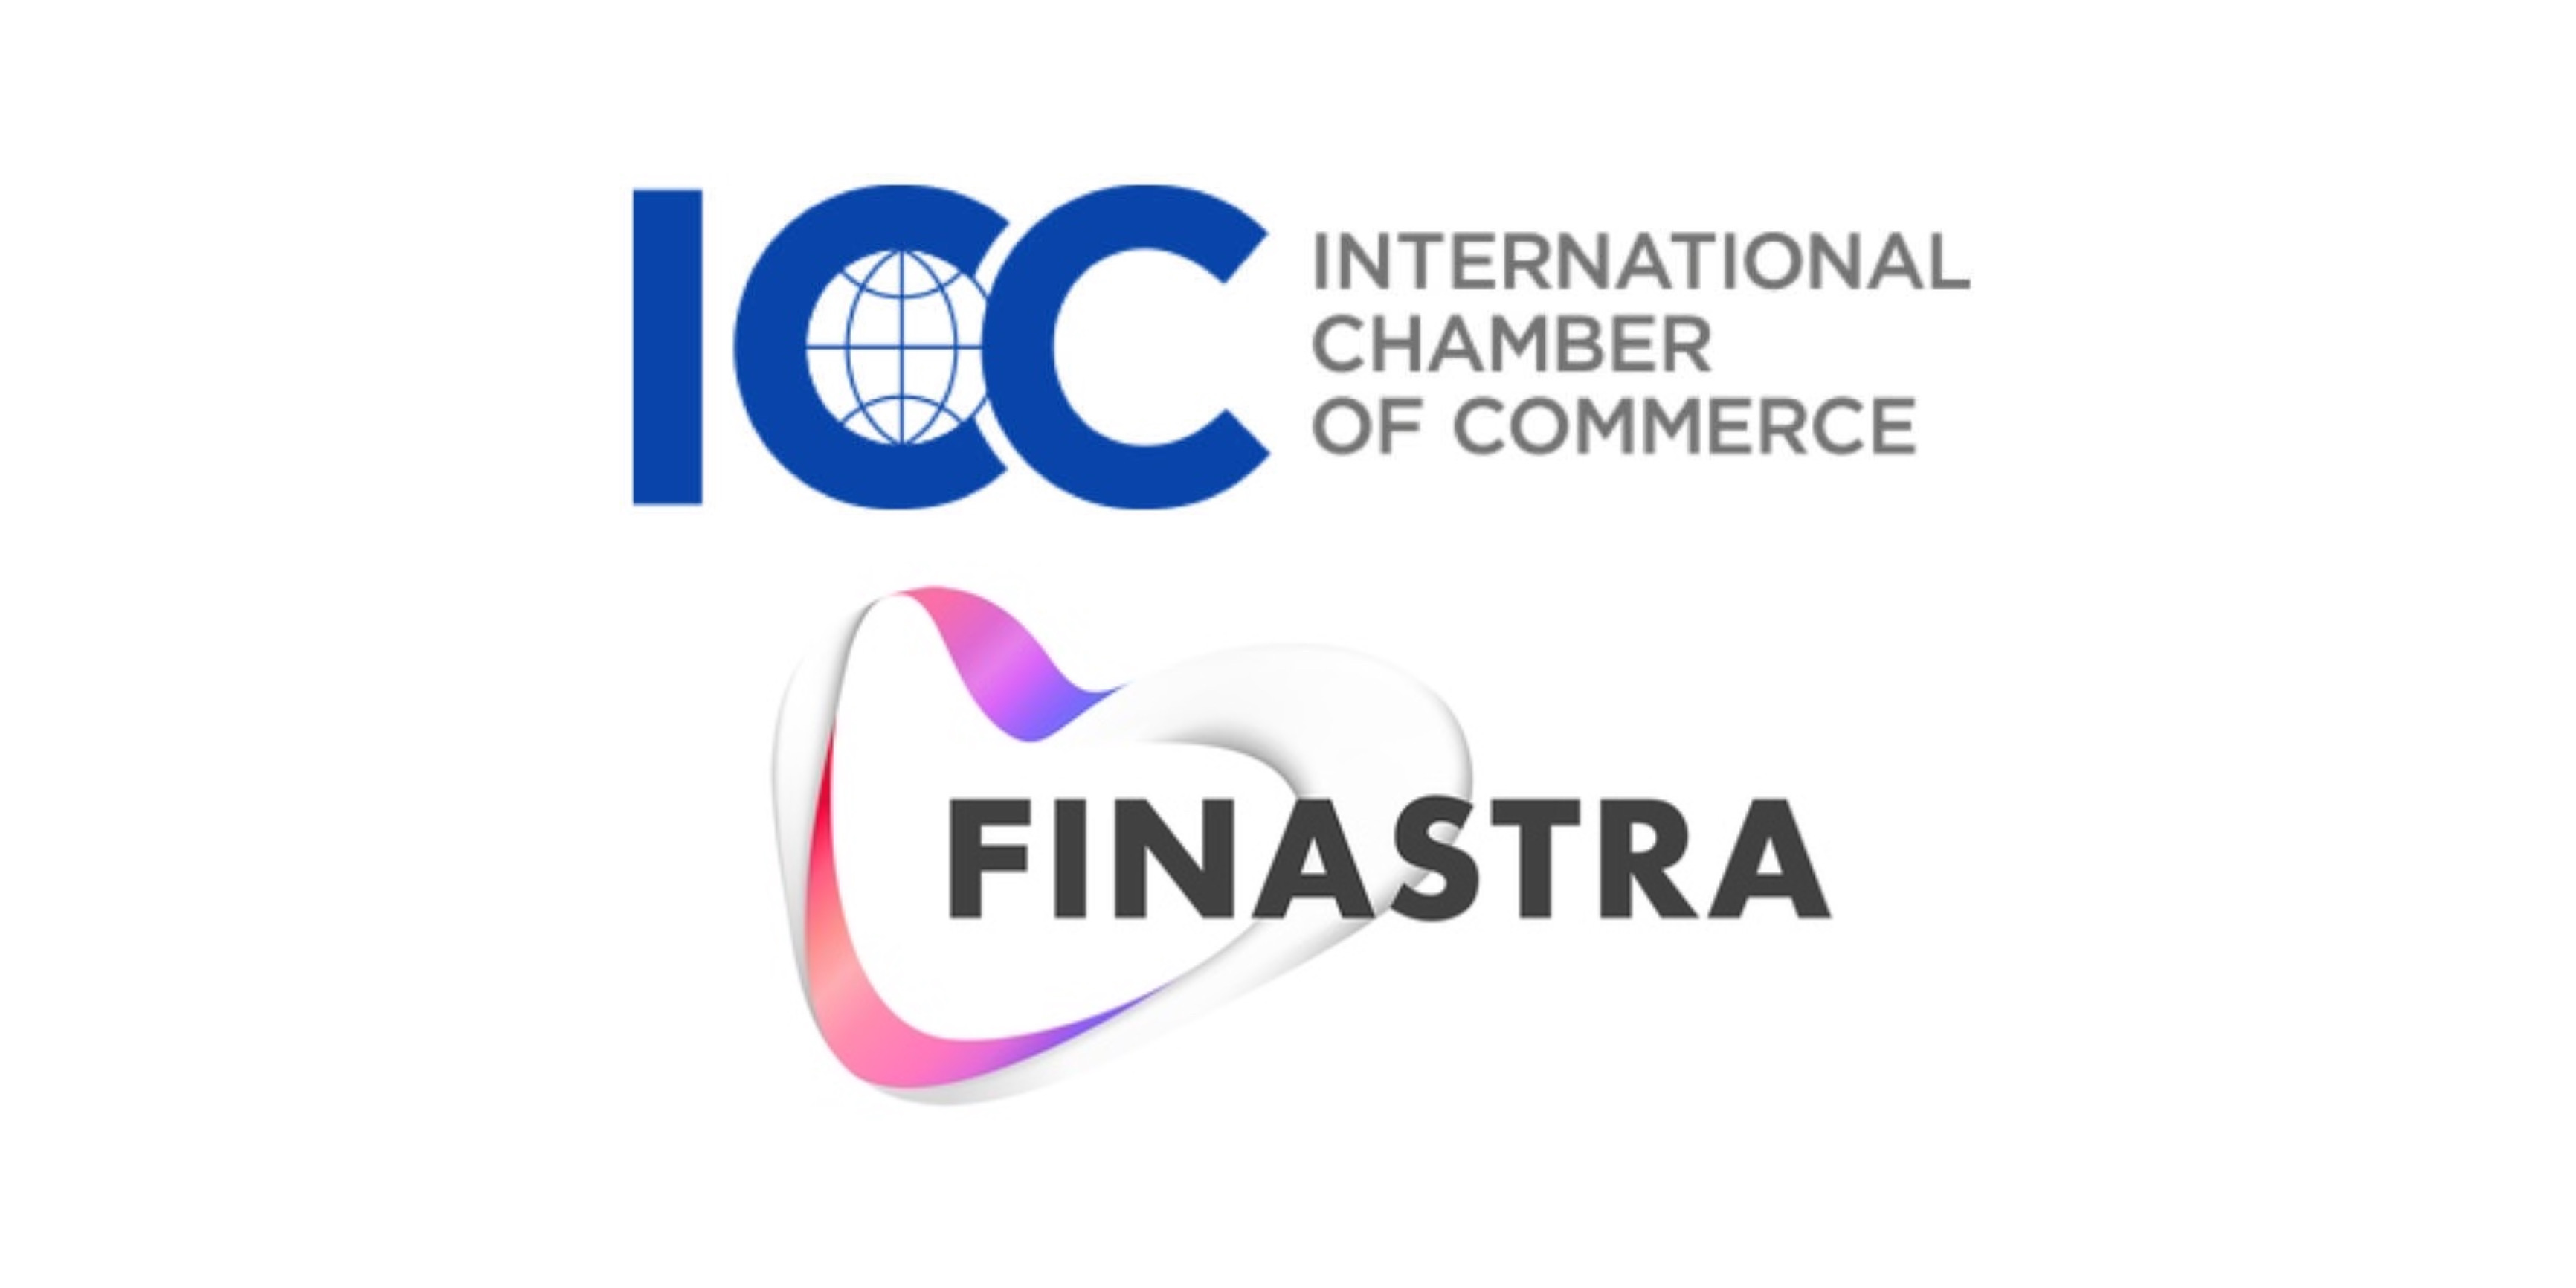 International Chamber of Commerce and Finastra Team Up to Tackle The Trade Finance Gap